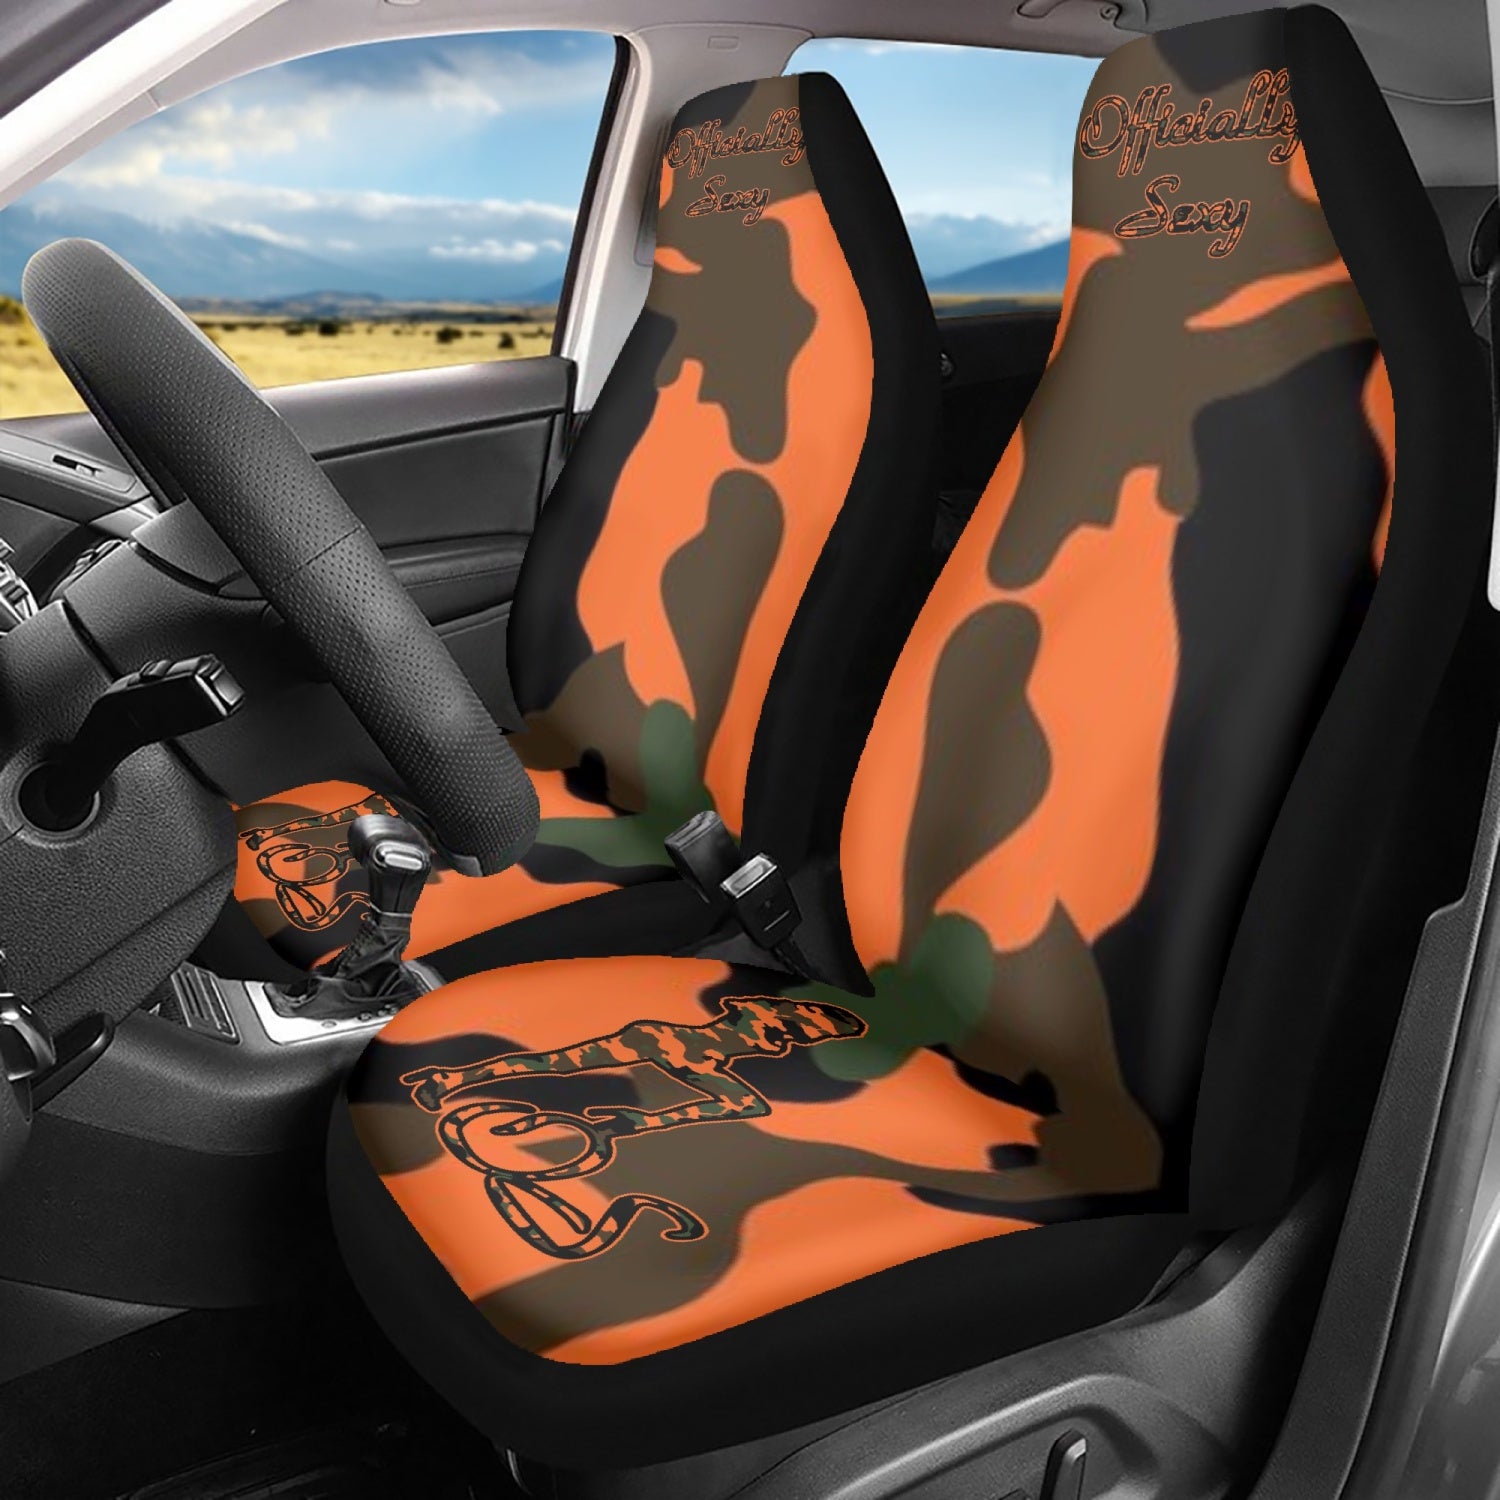 Officially Sexy Orange Army Camouflage Collection Microfiber Car Seat Covers - 3Pcs